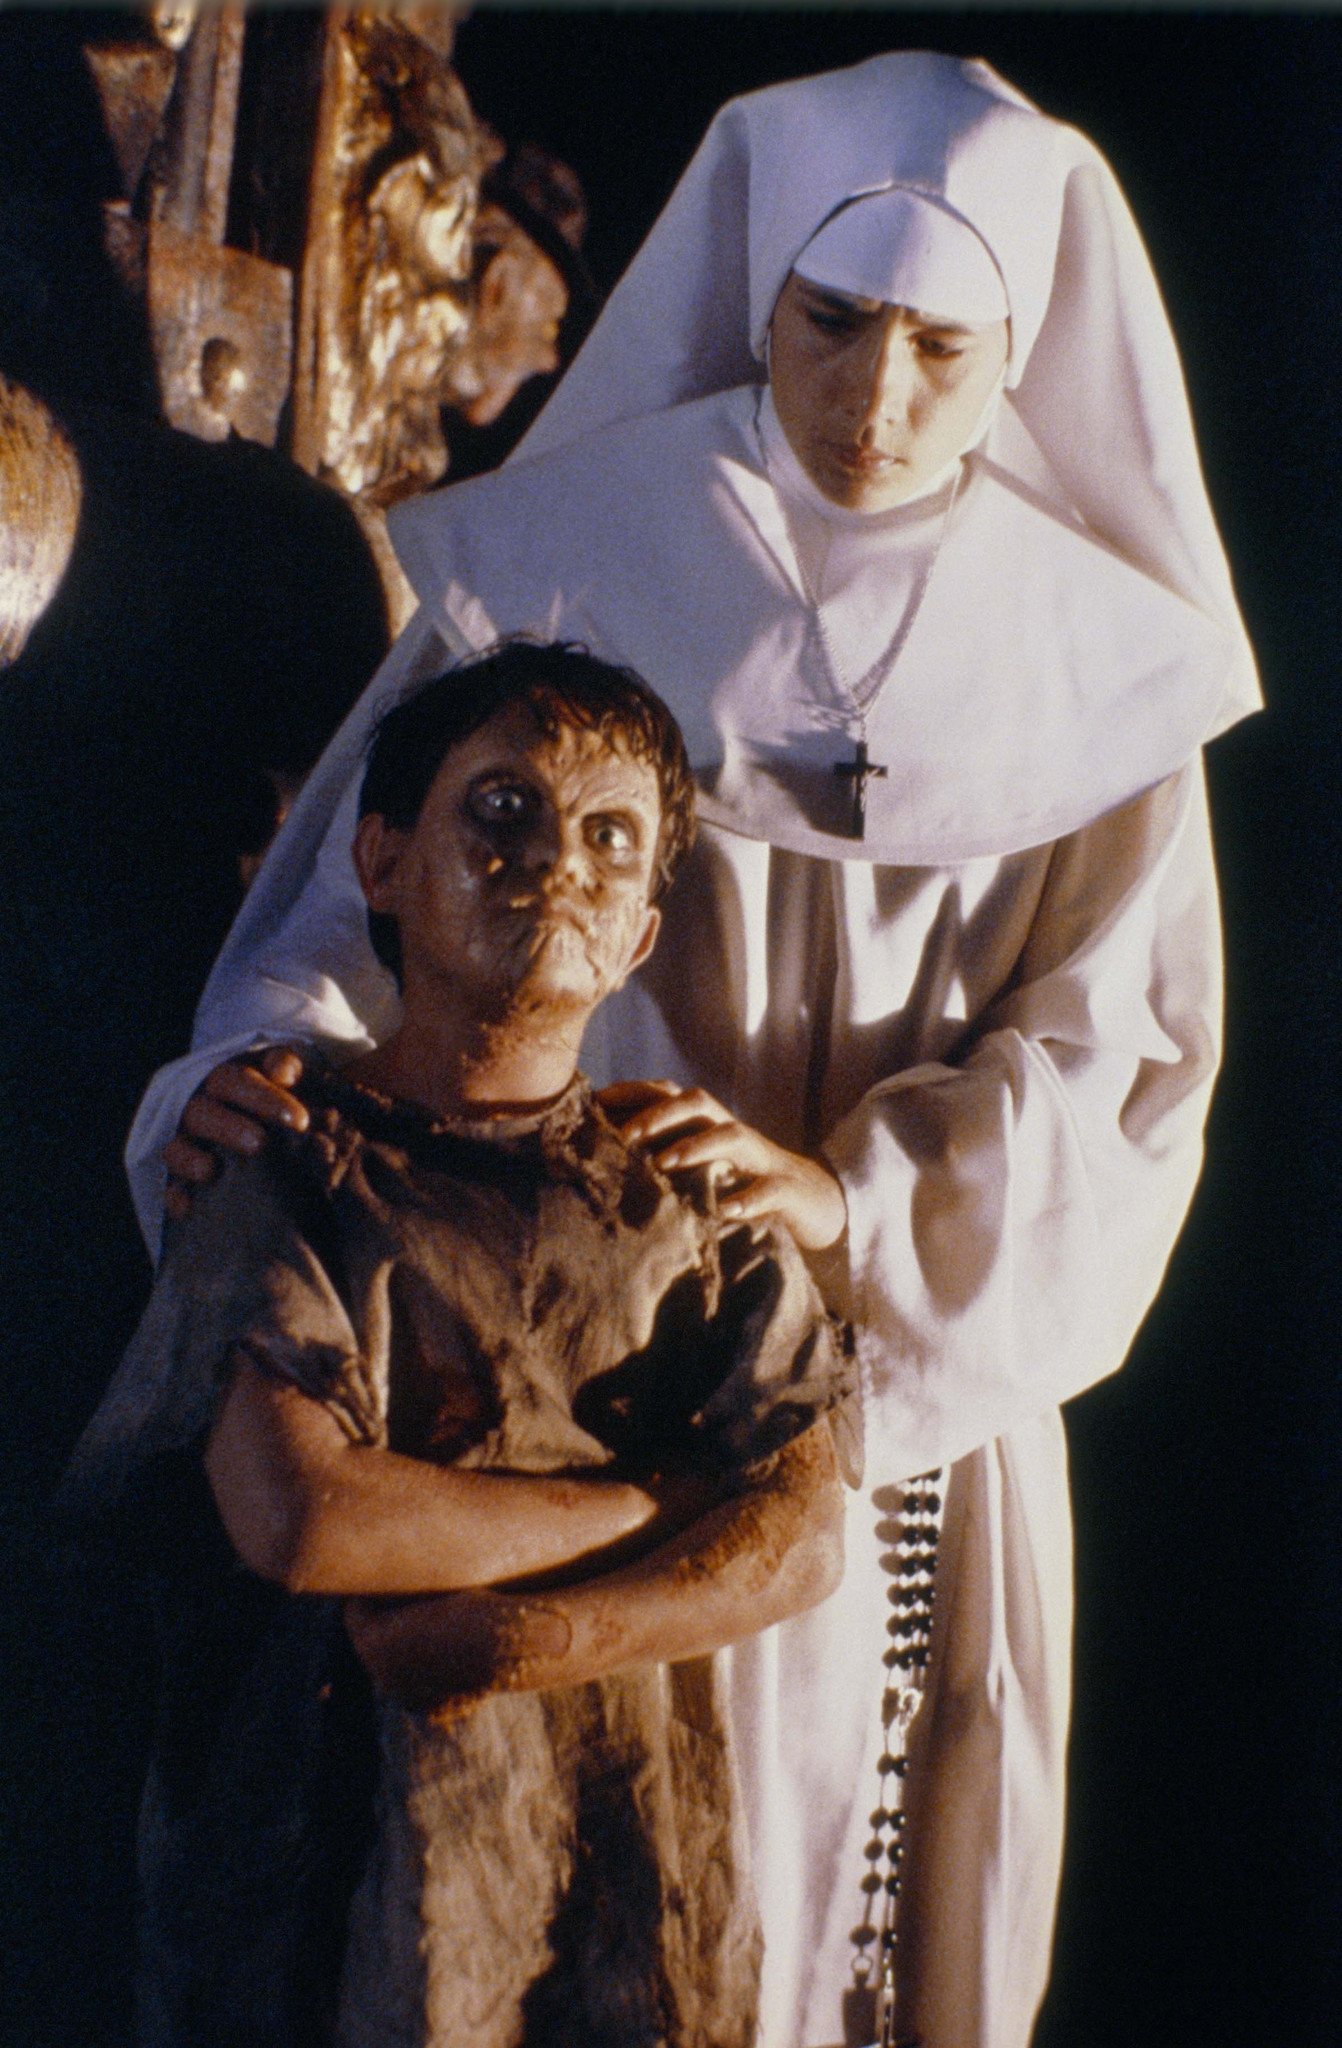 Still of Beatrice Boepple and Whit Hertford in A Nightmare on Elm Street: The Dream Child (1989)